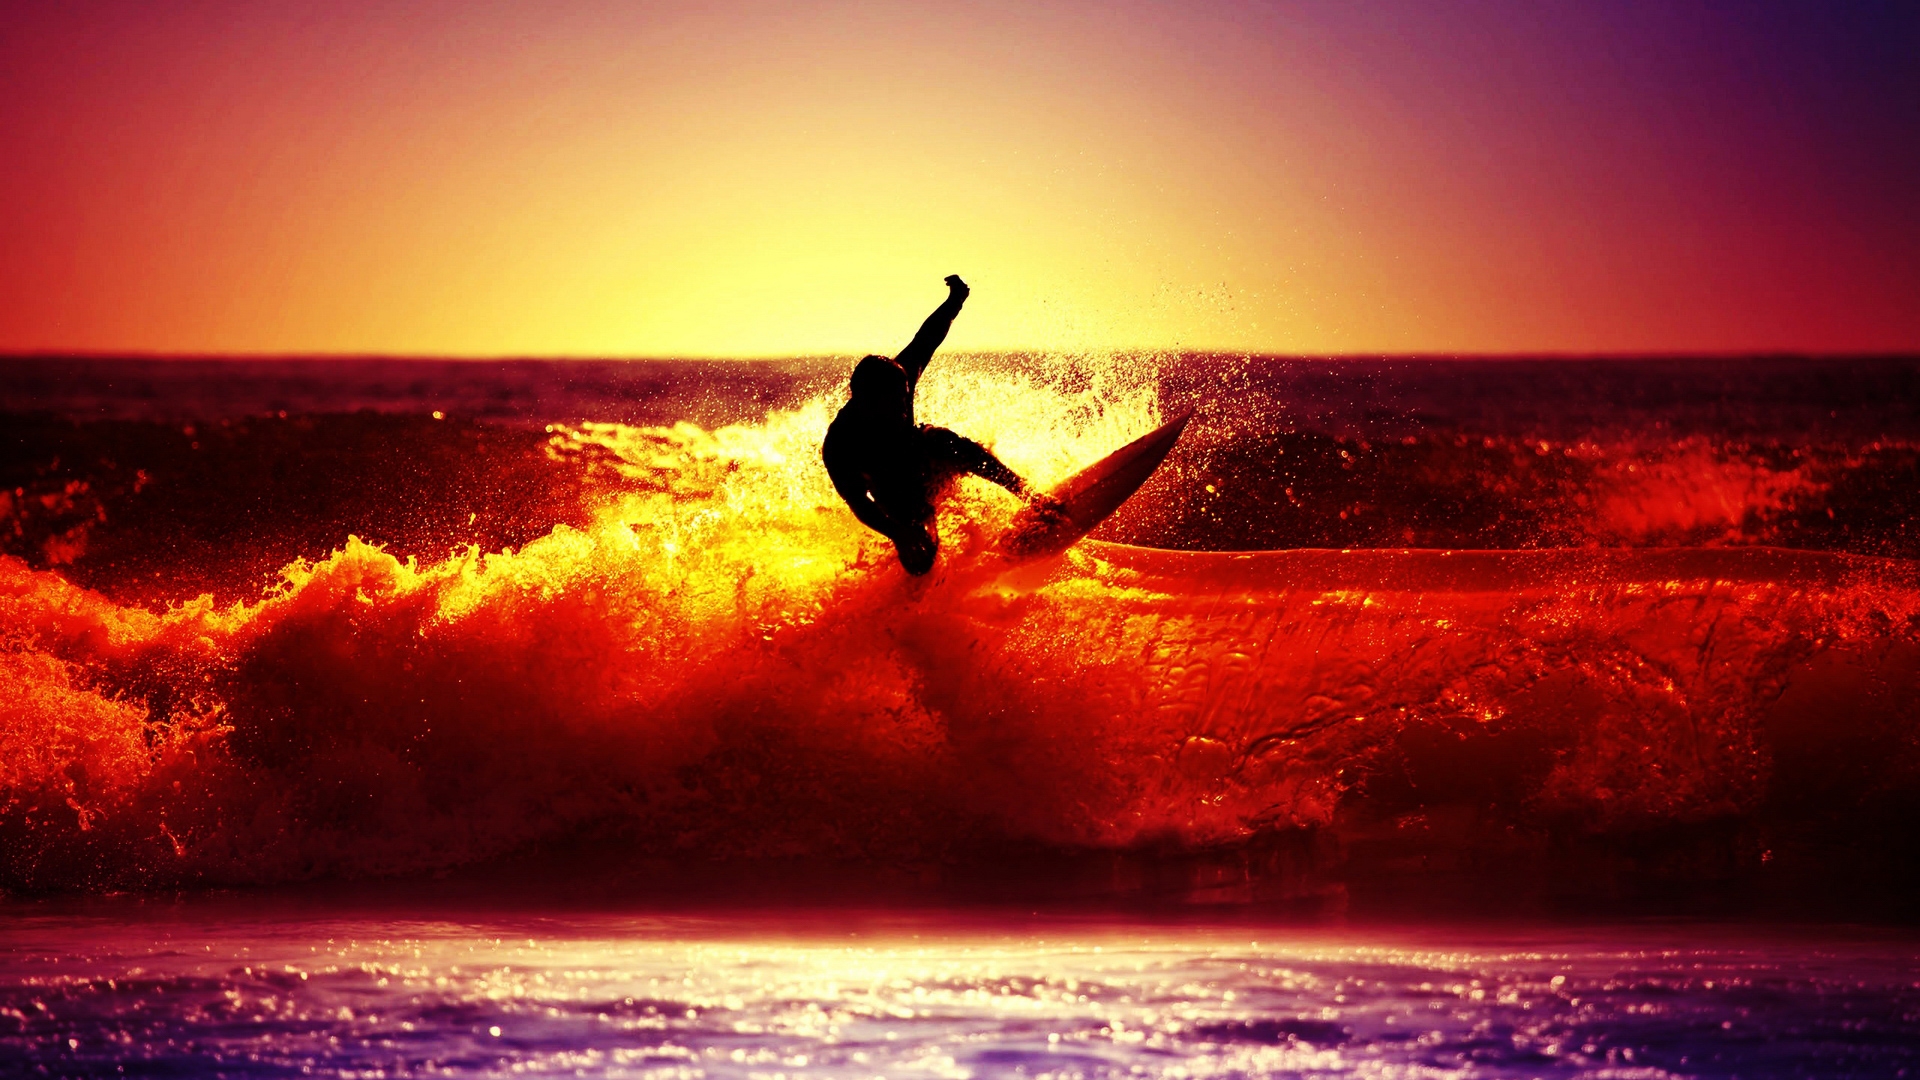 Sunset Surfing   High Definition Wallpapers   HD wallpapers